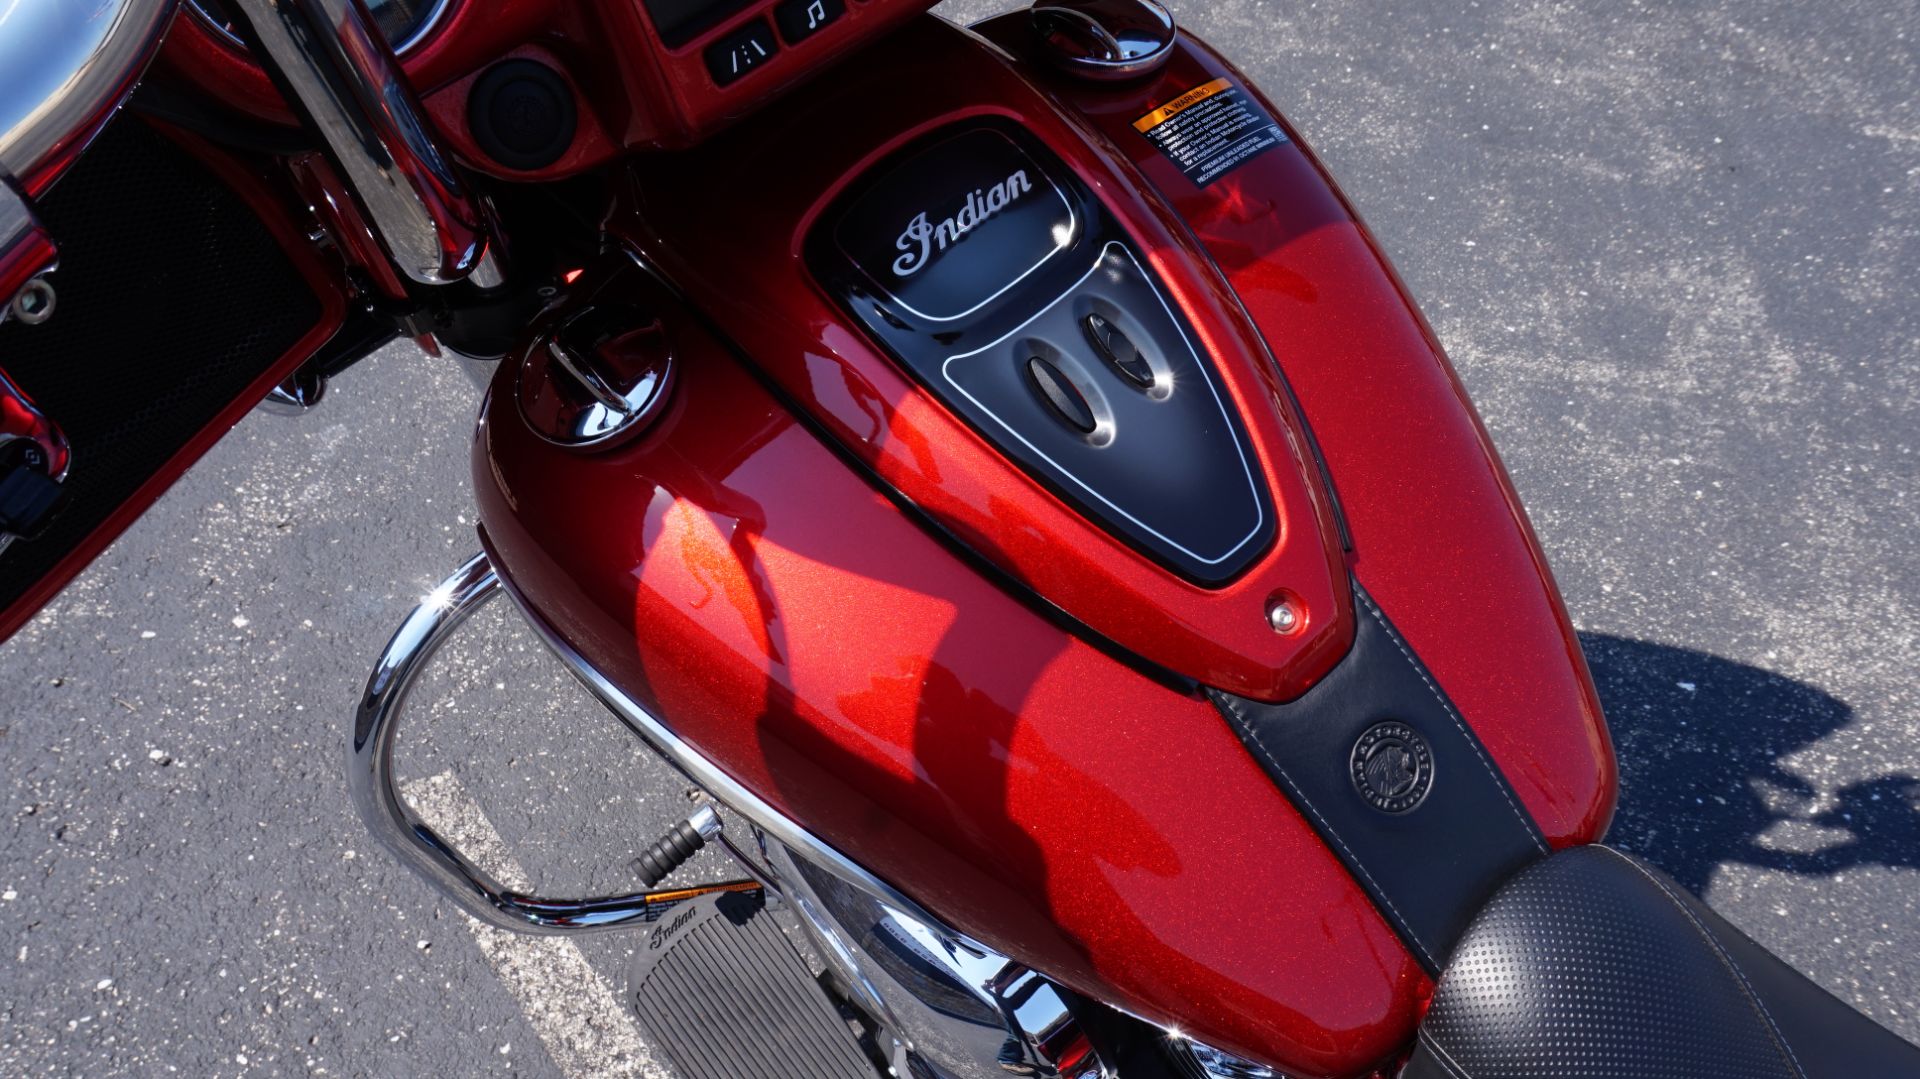 2019 Indian Motorcycle Chieftain® Limited ABS in Racine, Wisconsin - Photo 23